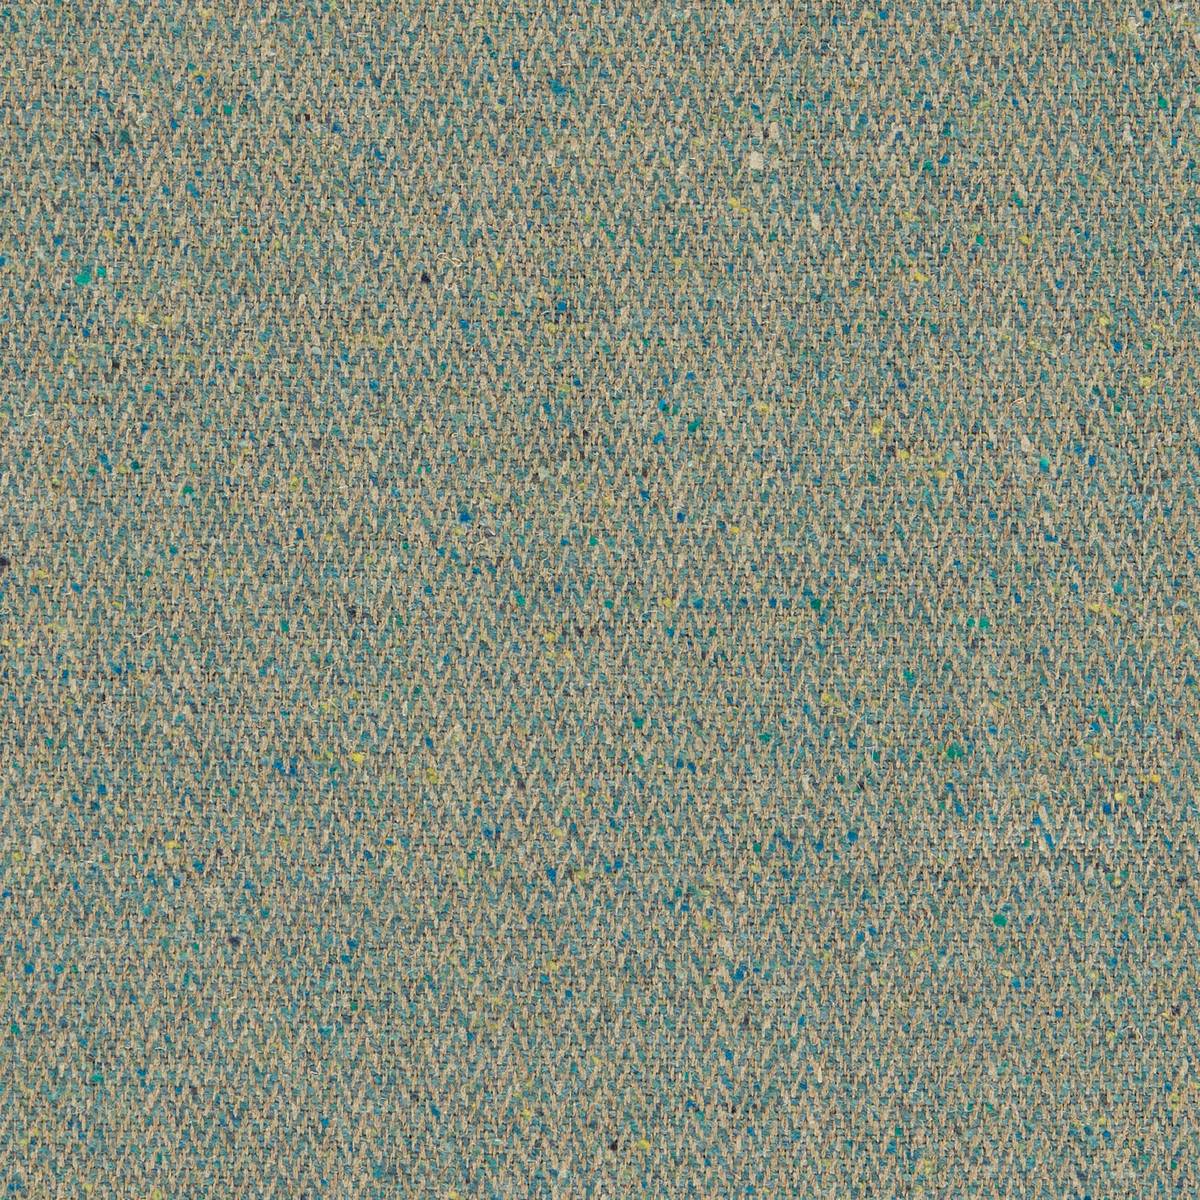 Brunswick Teal Fabric by William Morris & Co.